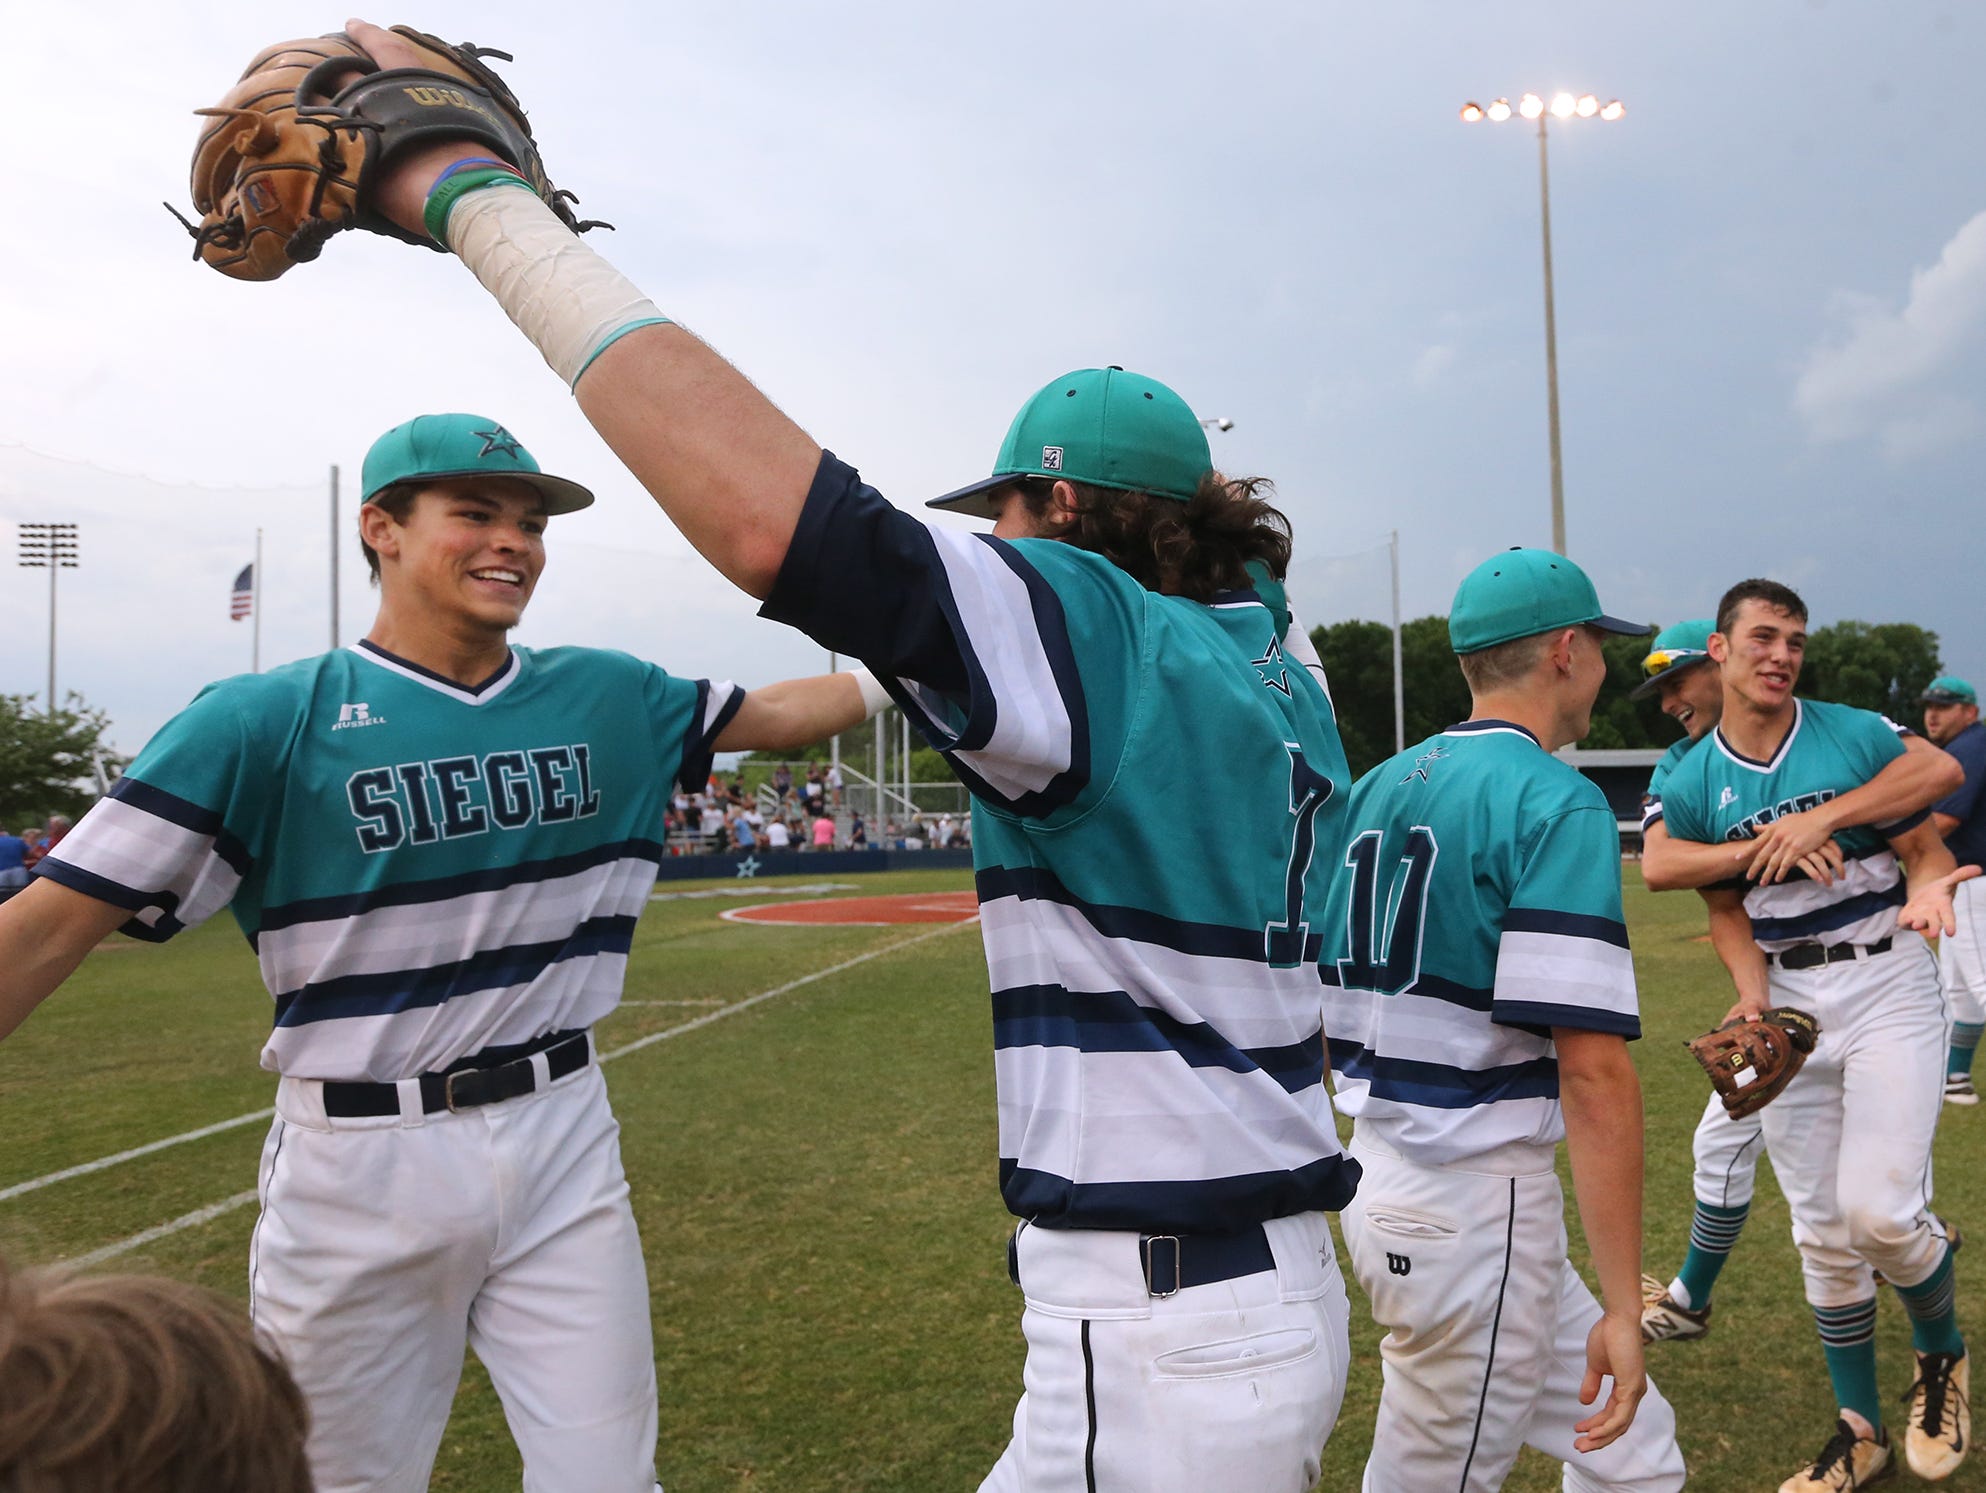 Siegel's Drew Benefiedl (24) and teammate Jordan Middleton (7) begin to hug after winning two games in a row to advance to the state championship game.